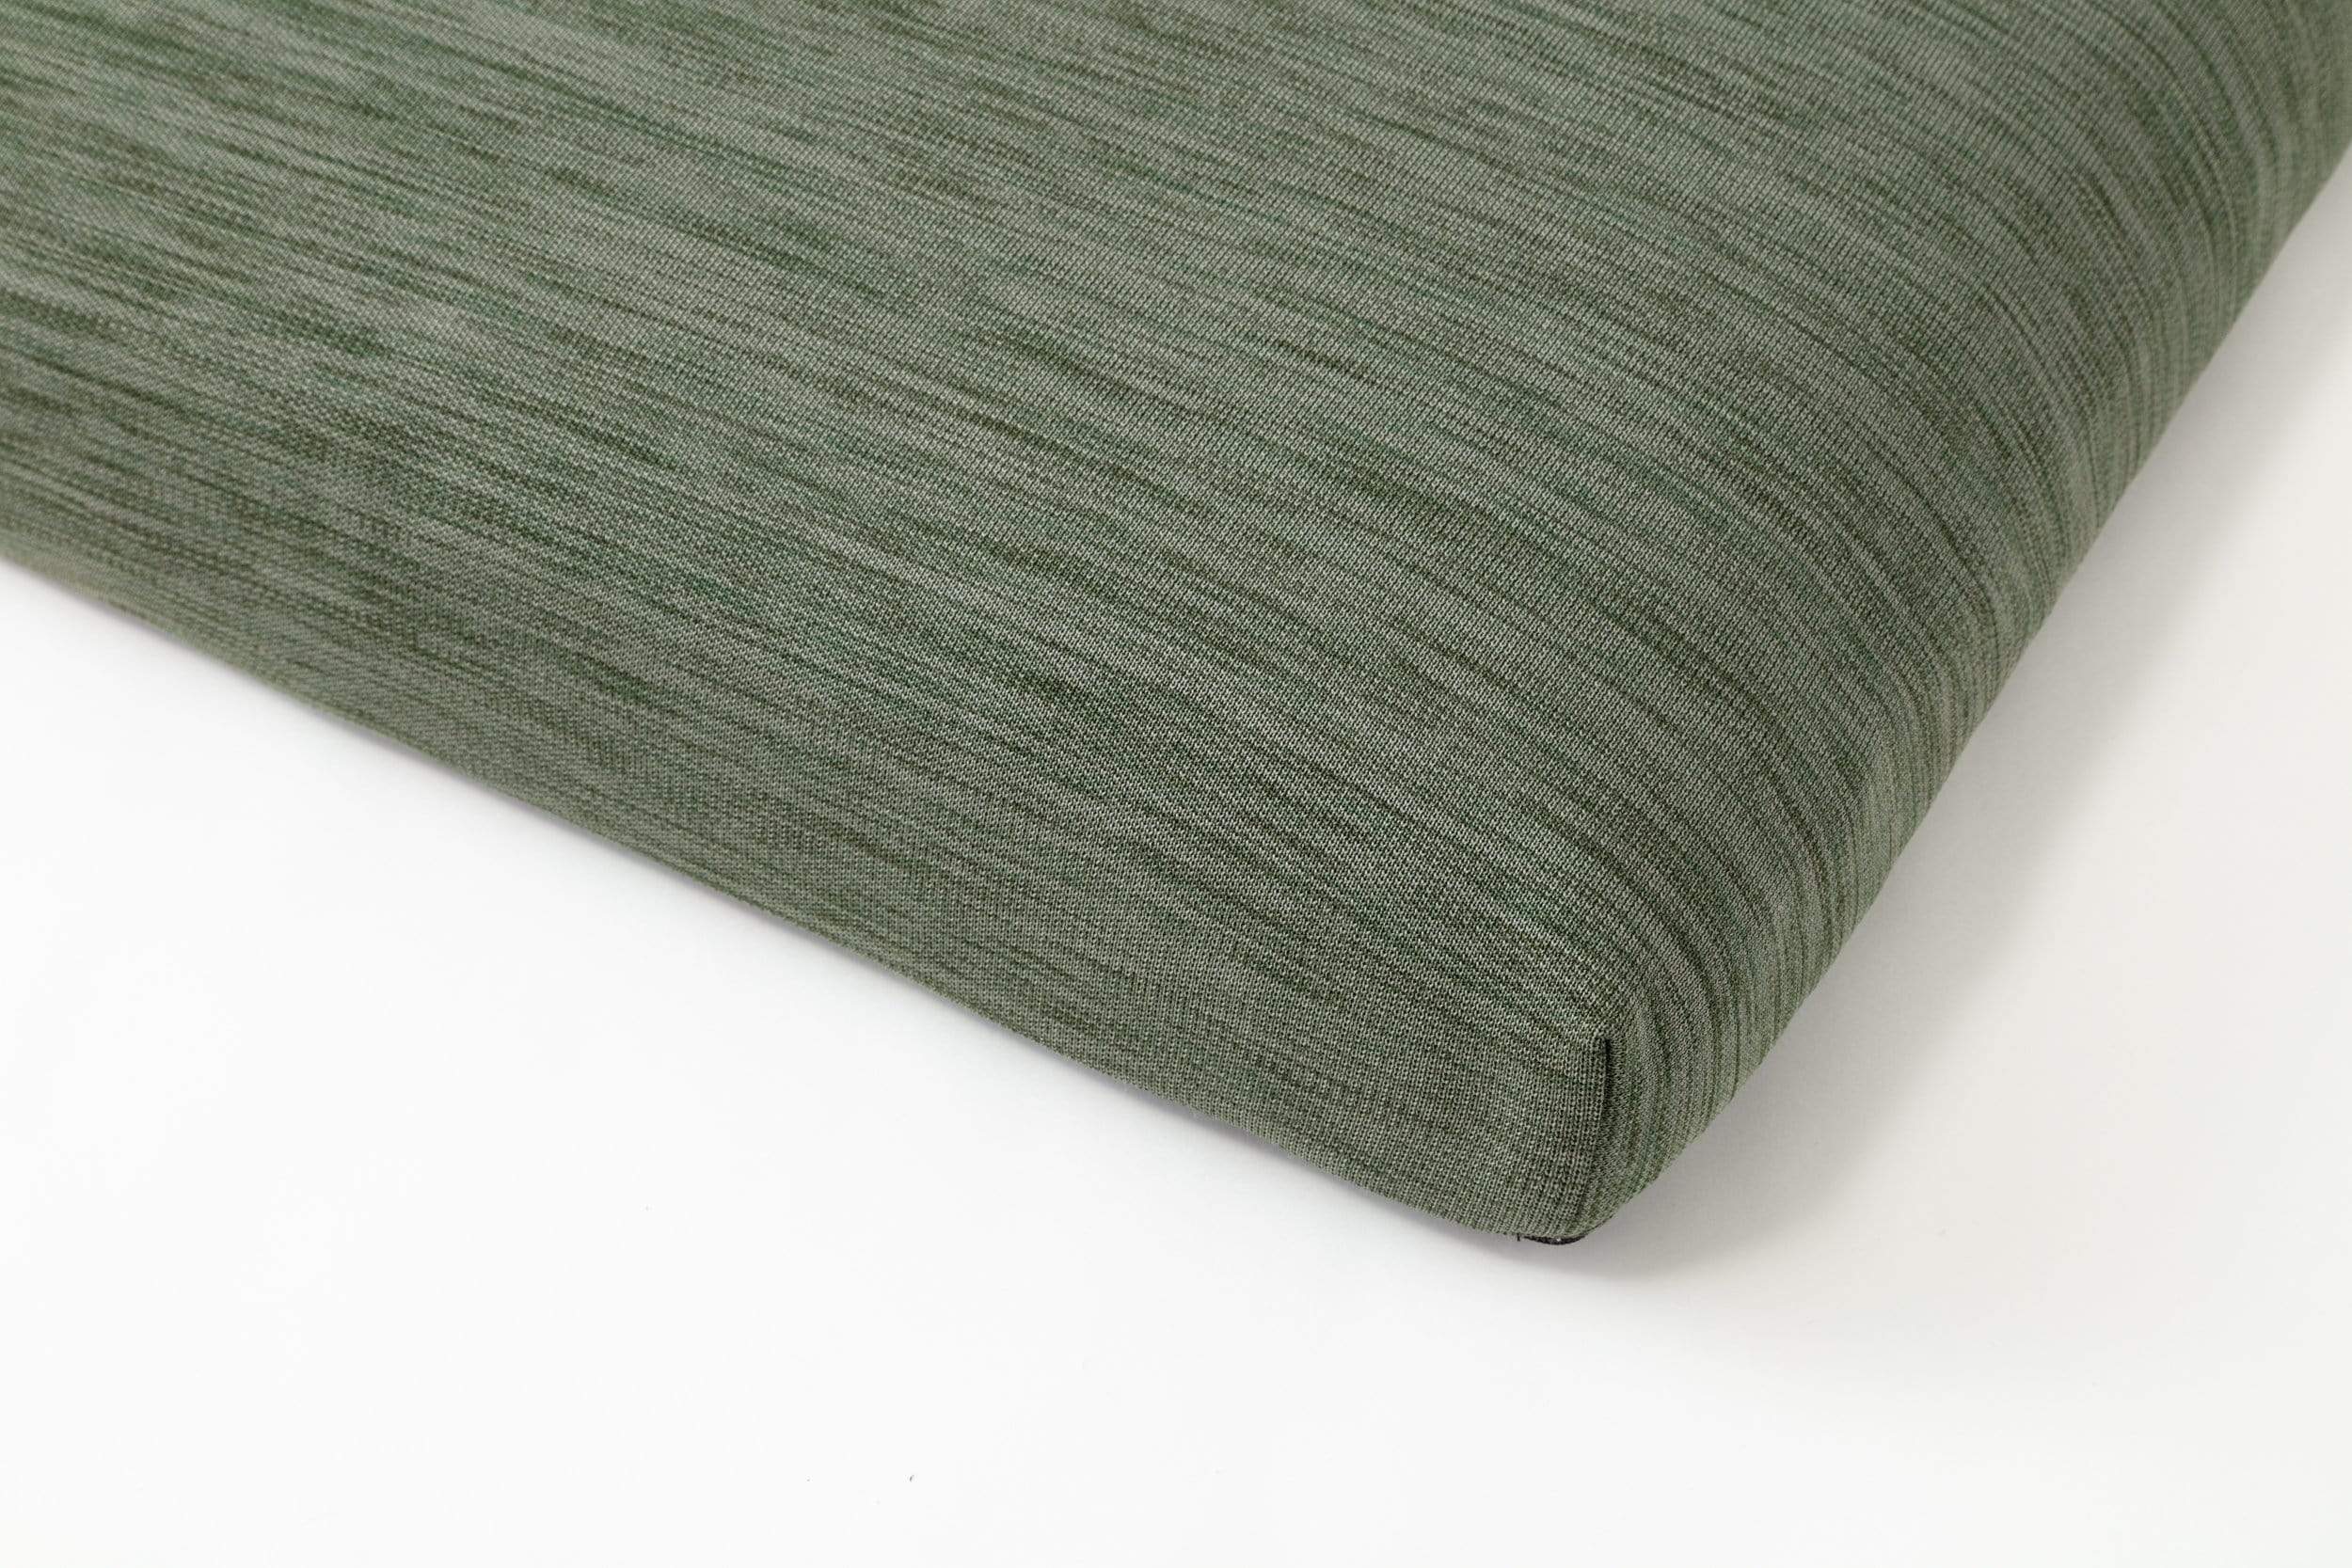 Laylo Pets Minimalist Sage Dog Bed or Bed Cover Lay Lo Pets